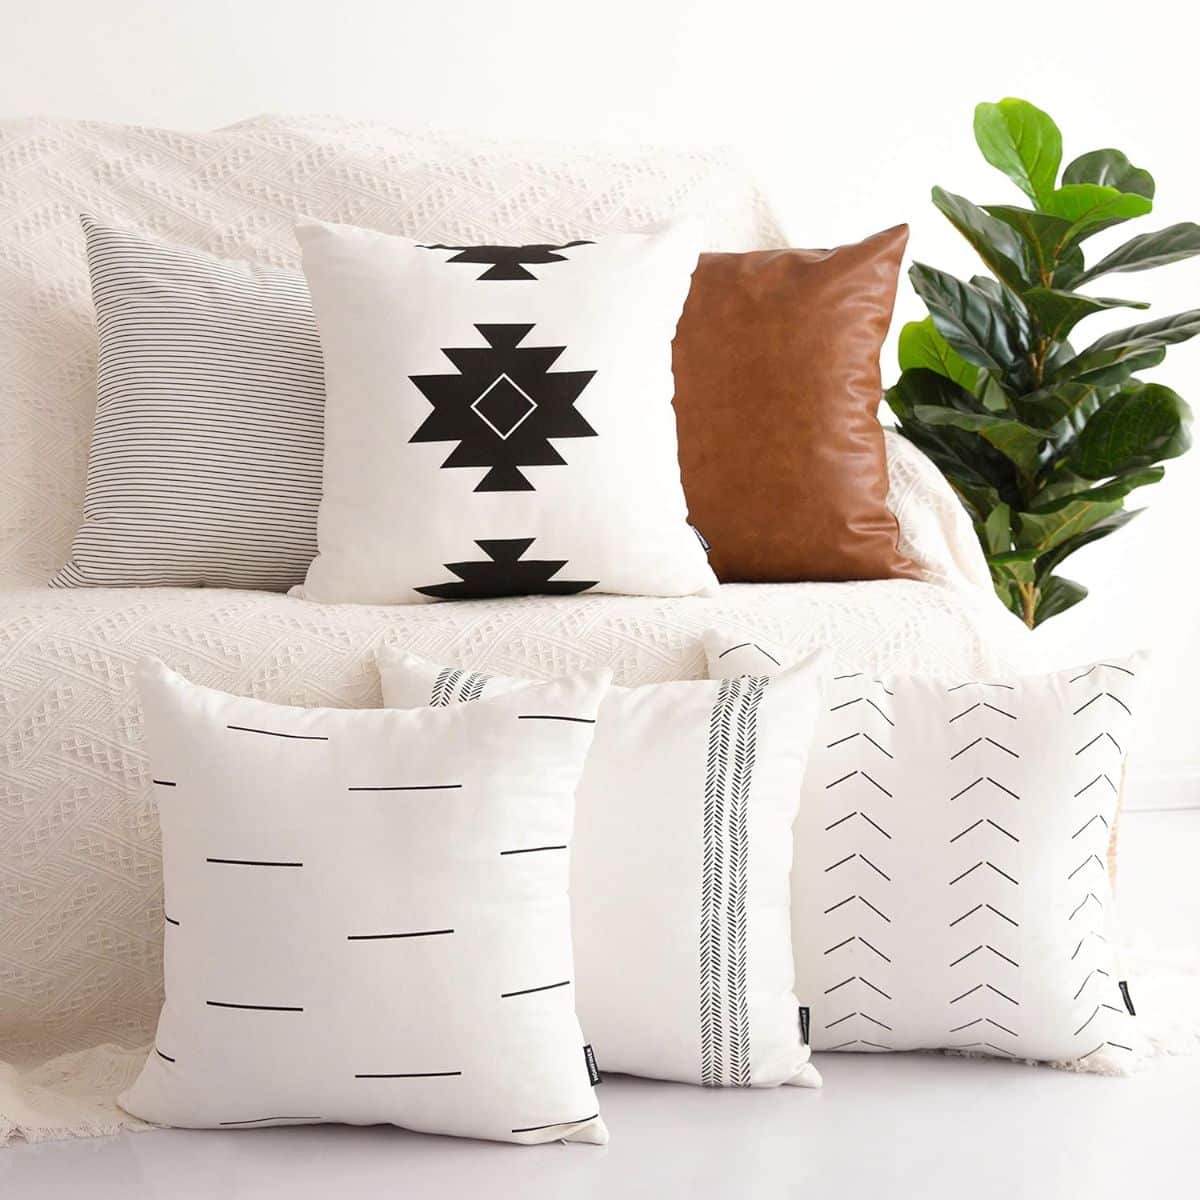 HOMFINER Decorative Throw Pillow Covers for Couch